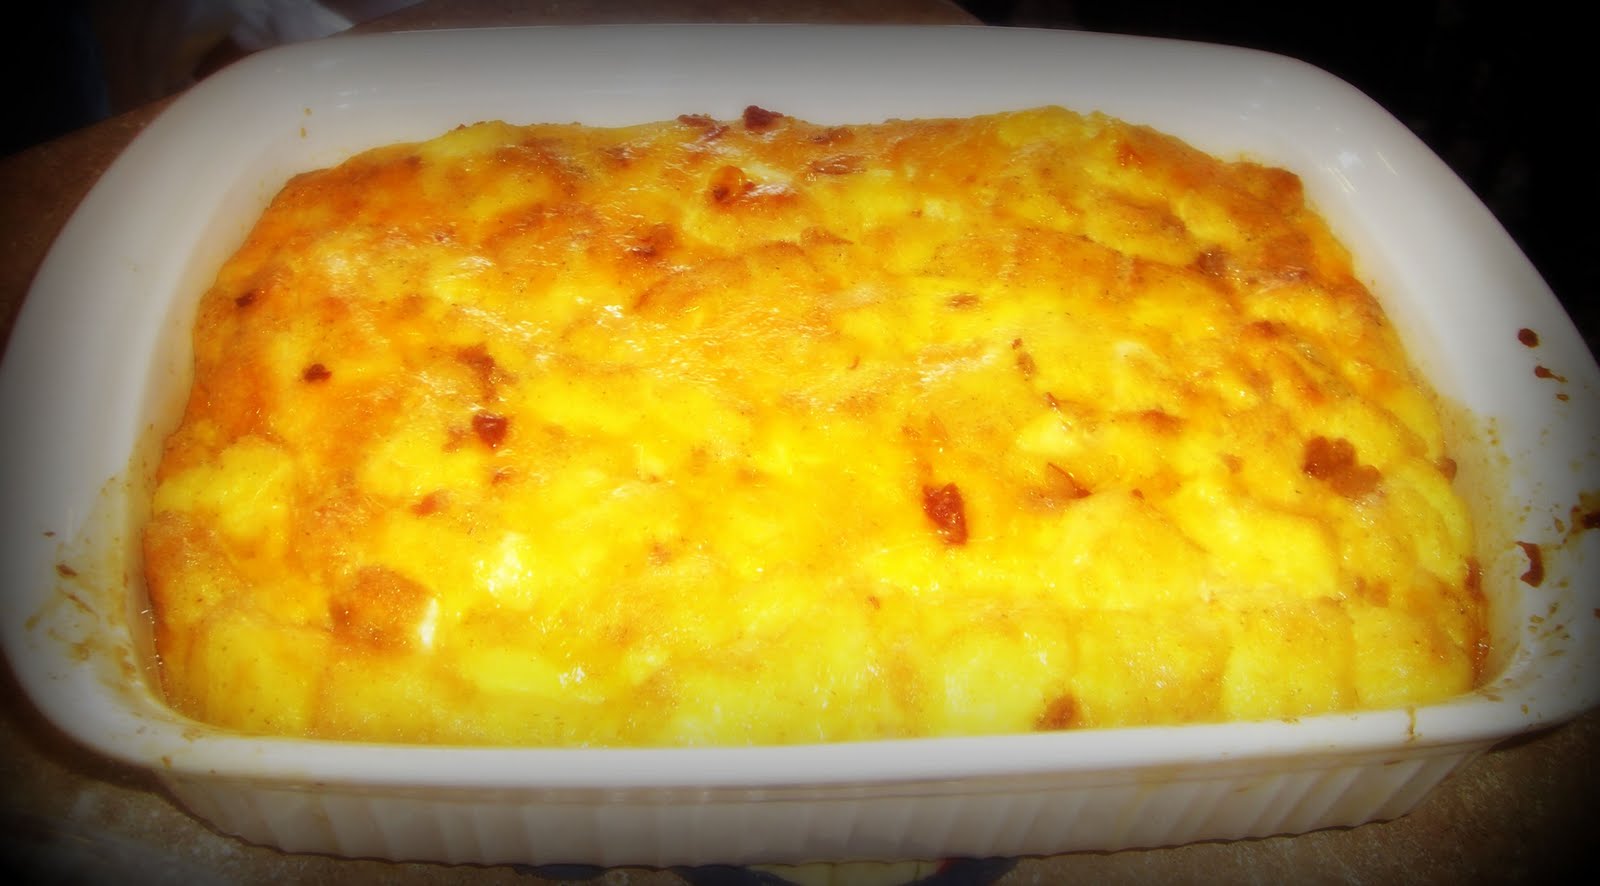 What's For Dinner: Christmas Morning: Crouton and Egg Casserole